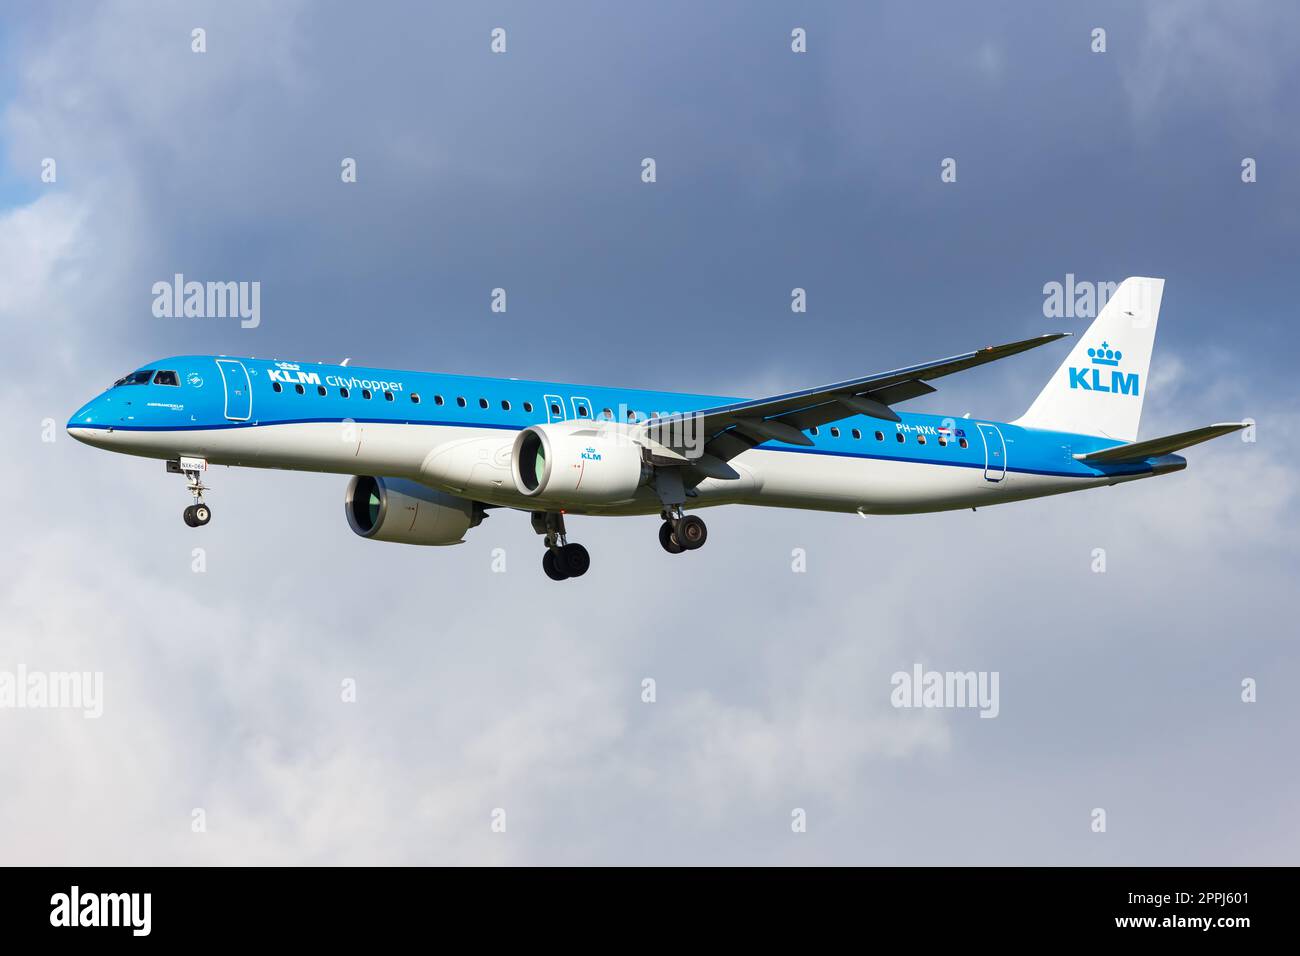 KLM Cityhopper Embraer 195 E2 airplane at Amsterdam Schiphol airport in the Netherlands Stock Photo